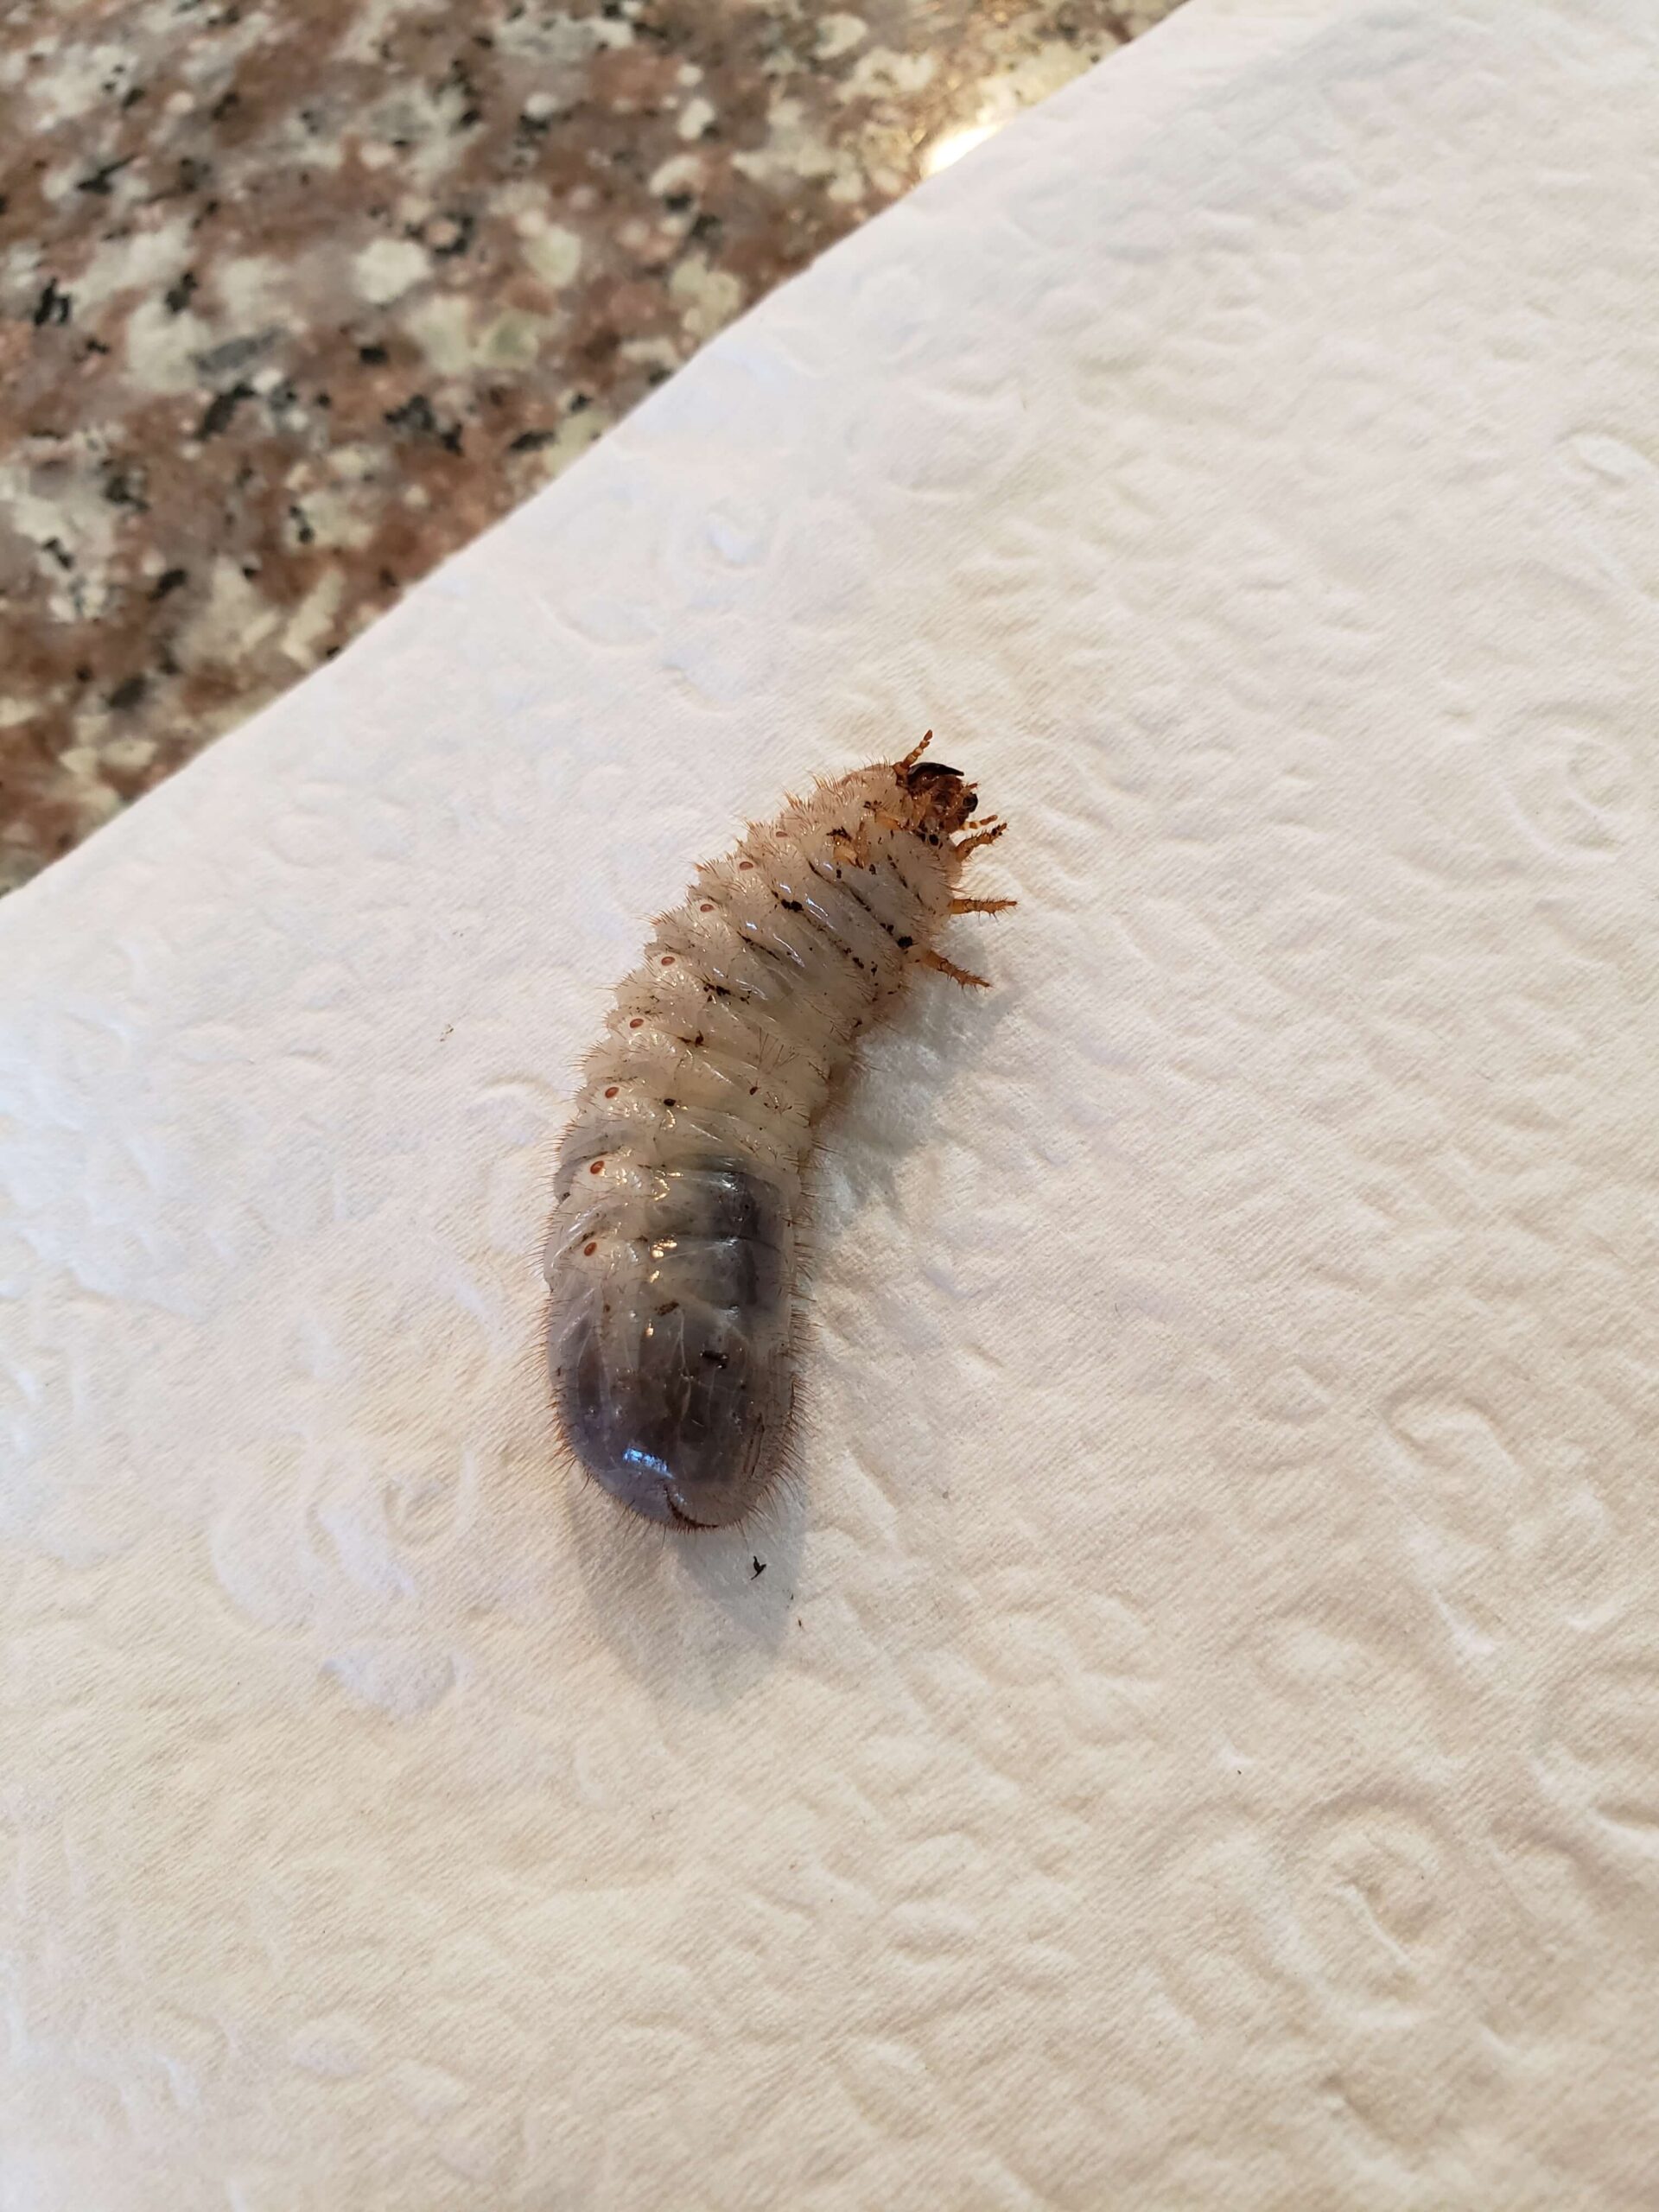 White-ish OFB grub laying on its side on a white background, with orange-colored legs in the air. 